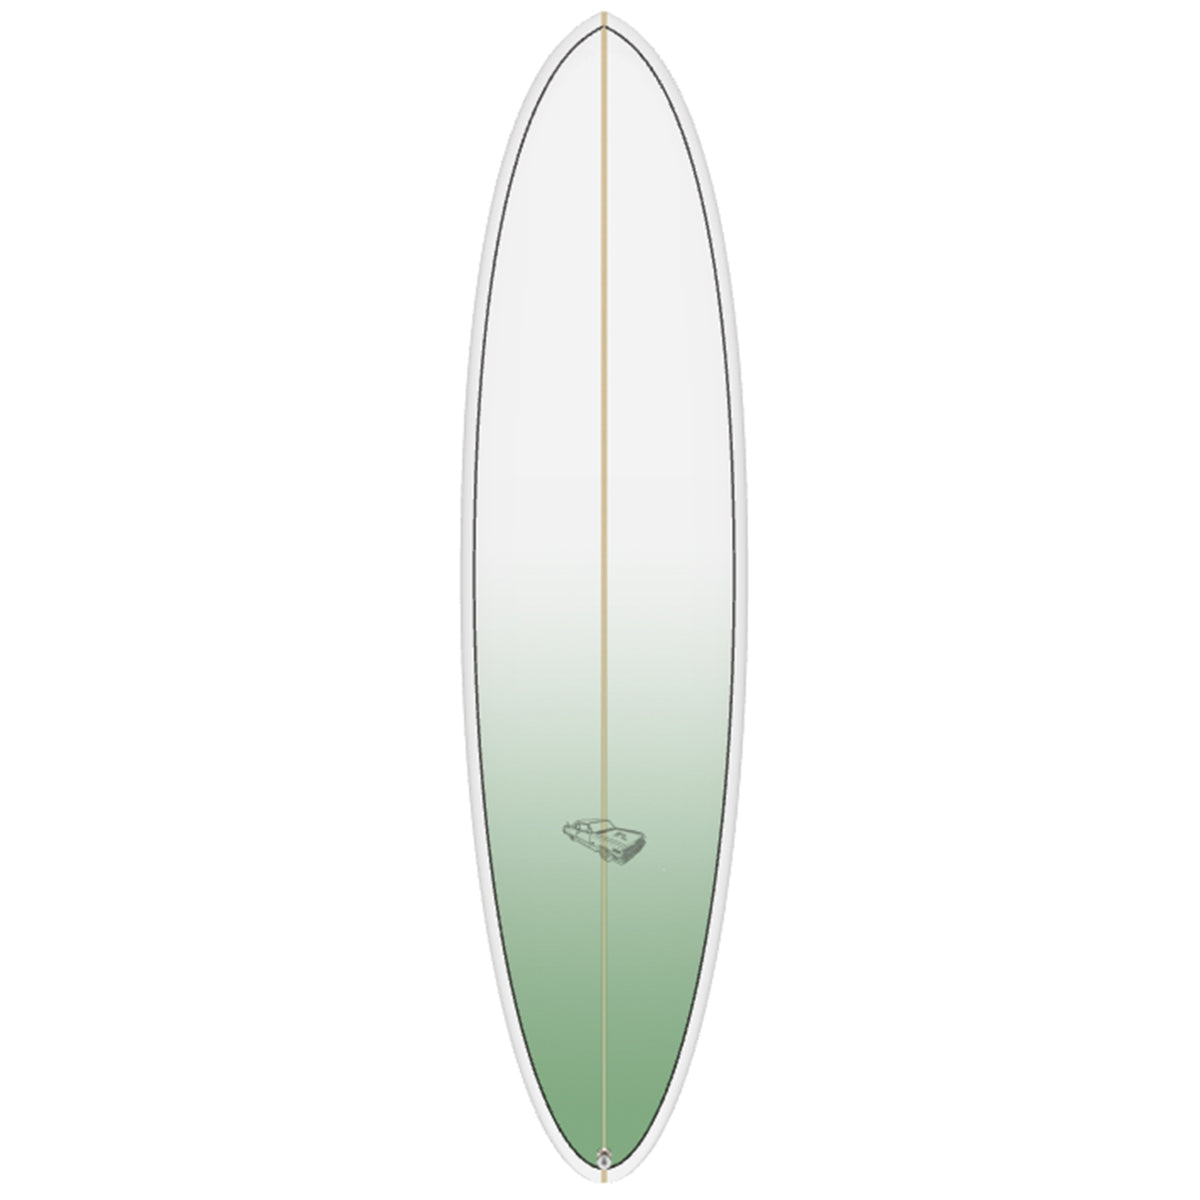 Lowrider - Mid Length - Rusty Surfboards - Top View - Sea Green